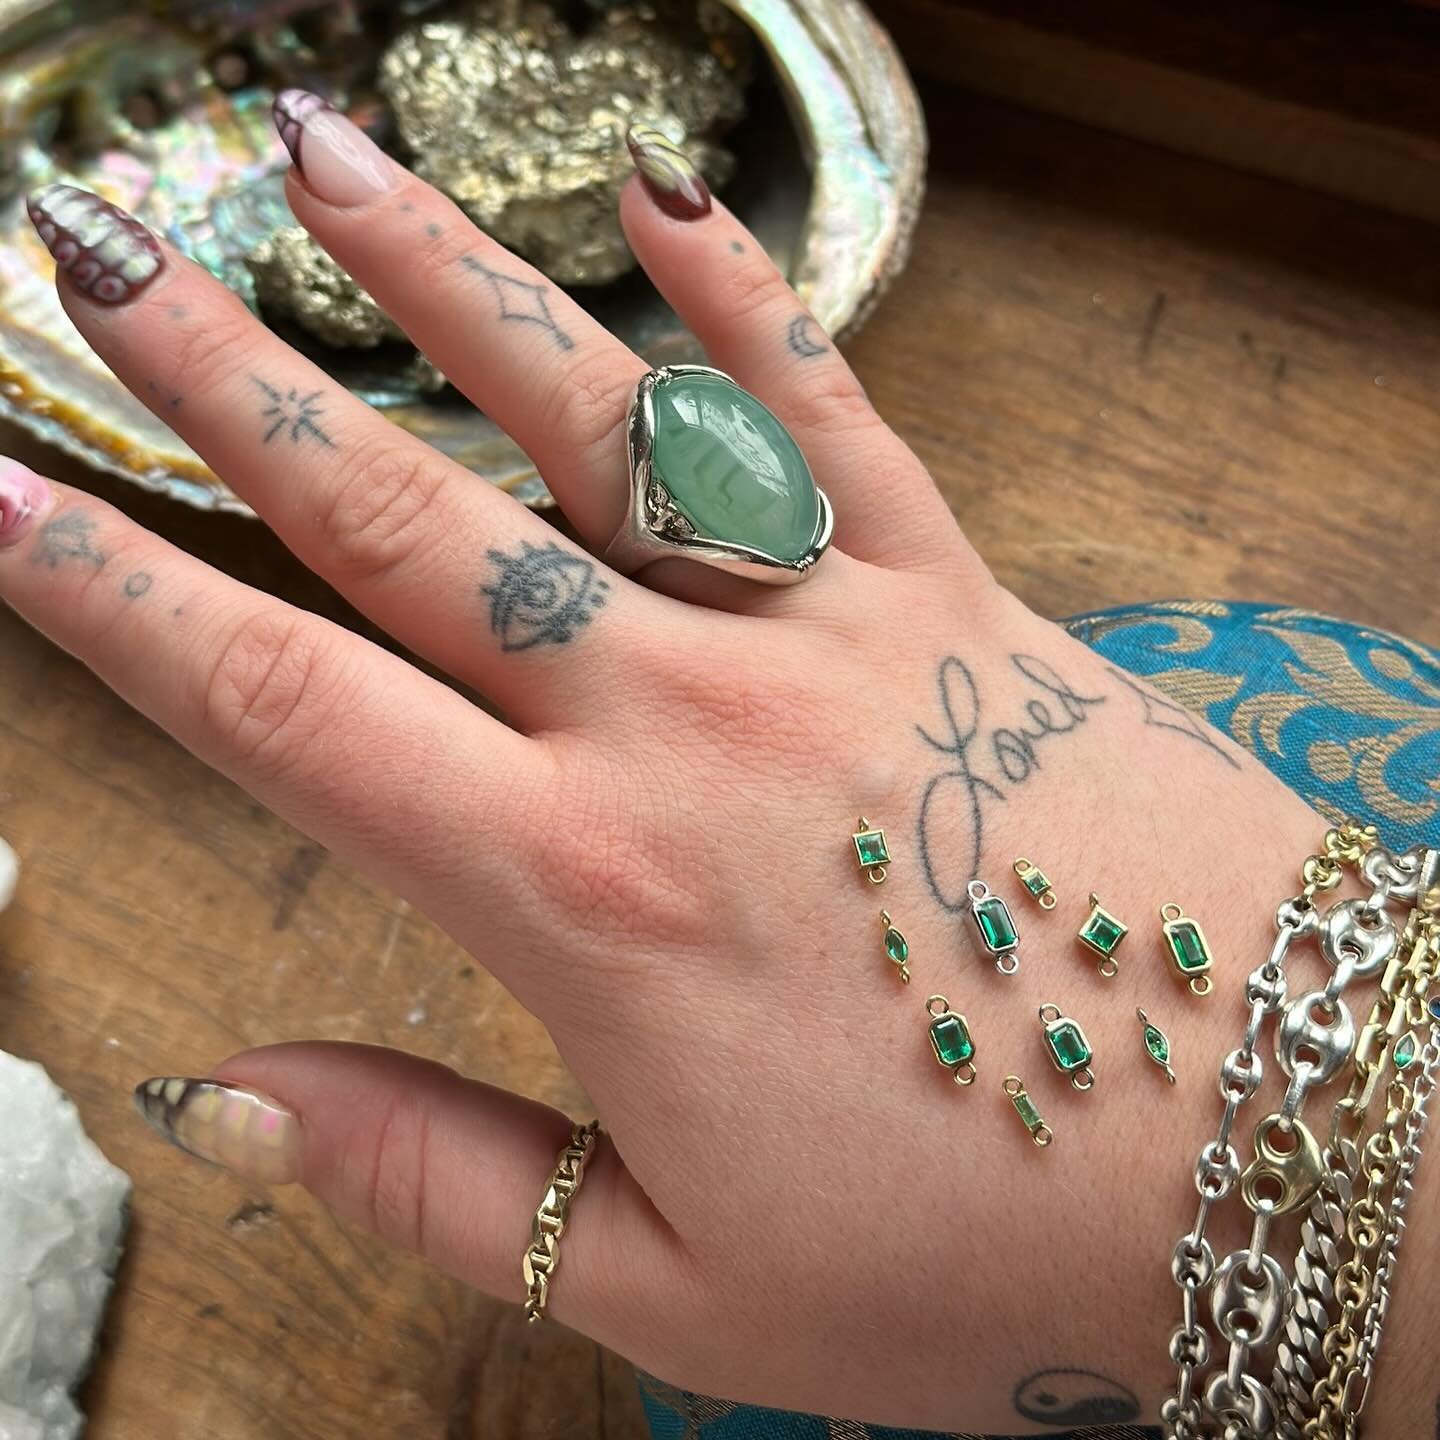 💚💚 E M E R A L D  M O N T H 💚💚

Emerald is one of the most powerful, highly sought after precious gemstones used for healing. Historically it has been used as an antidote to poisons and to strengthen or heal the physical body. For ages, it has be